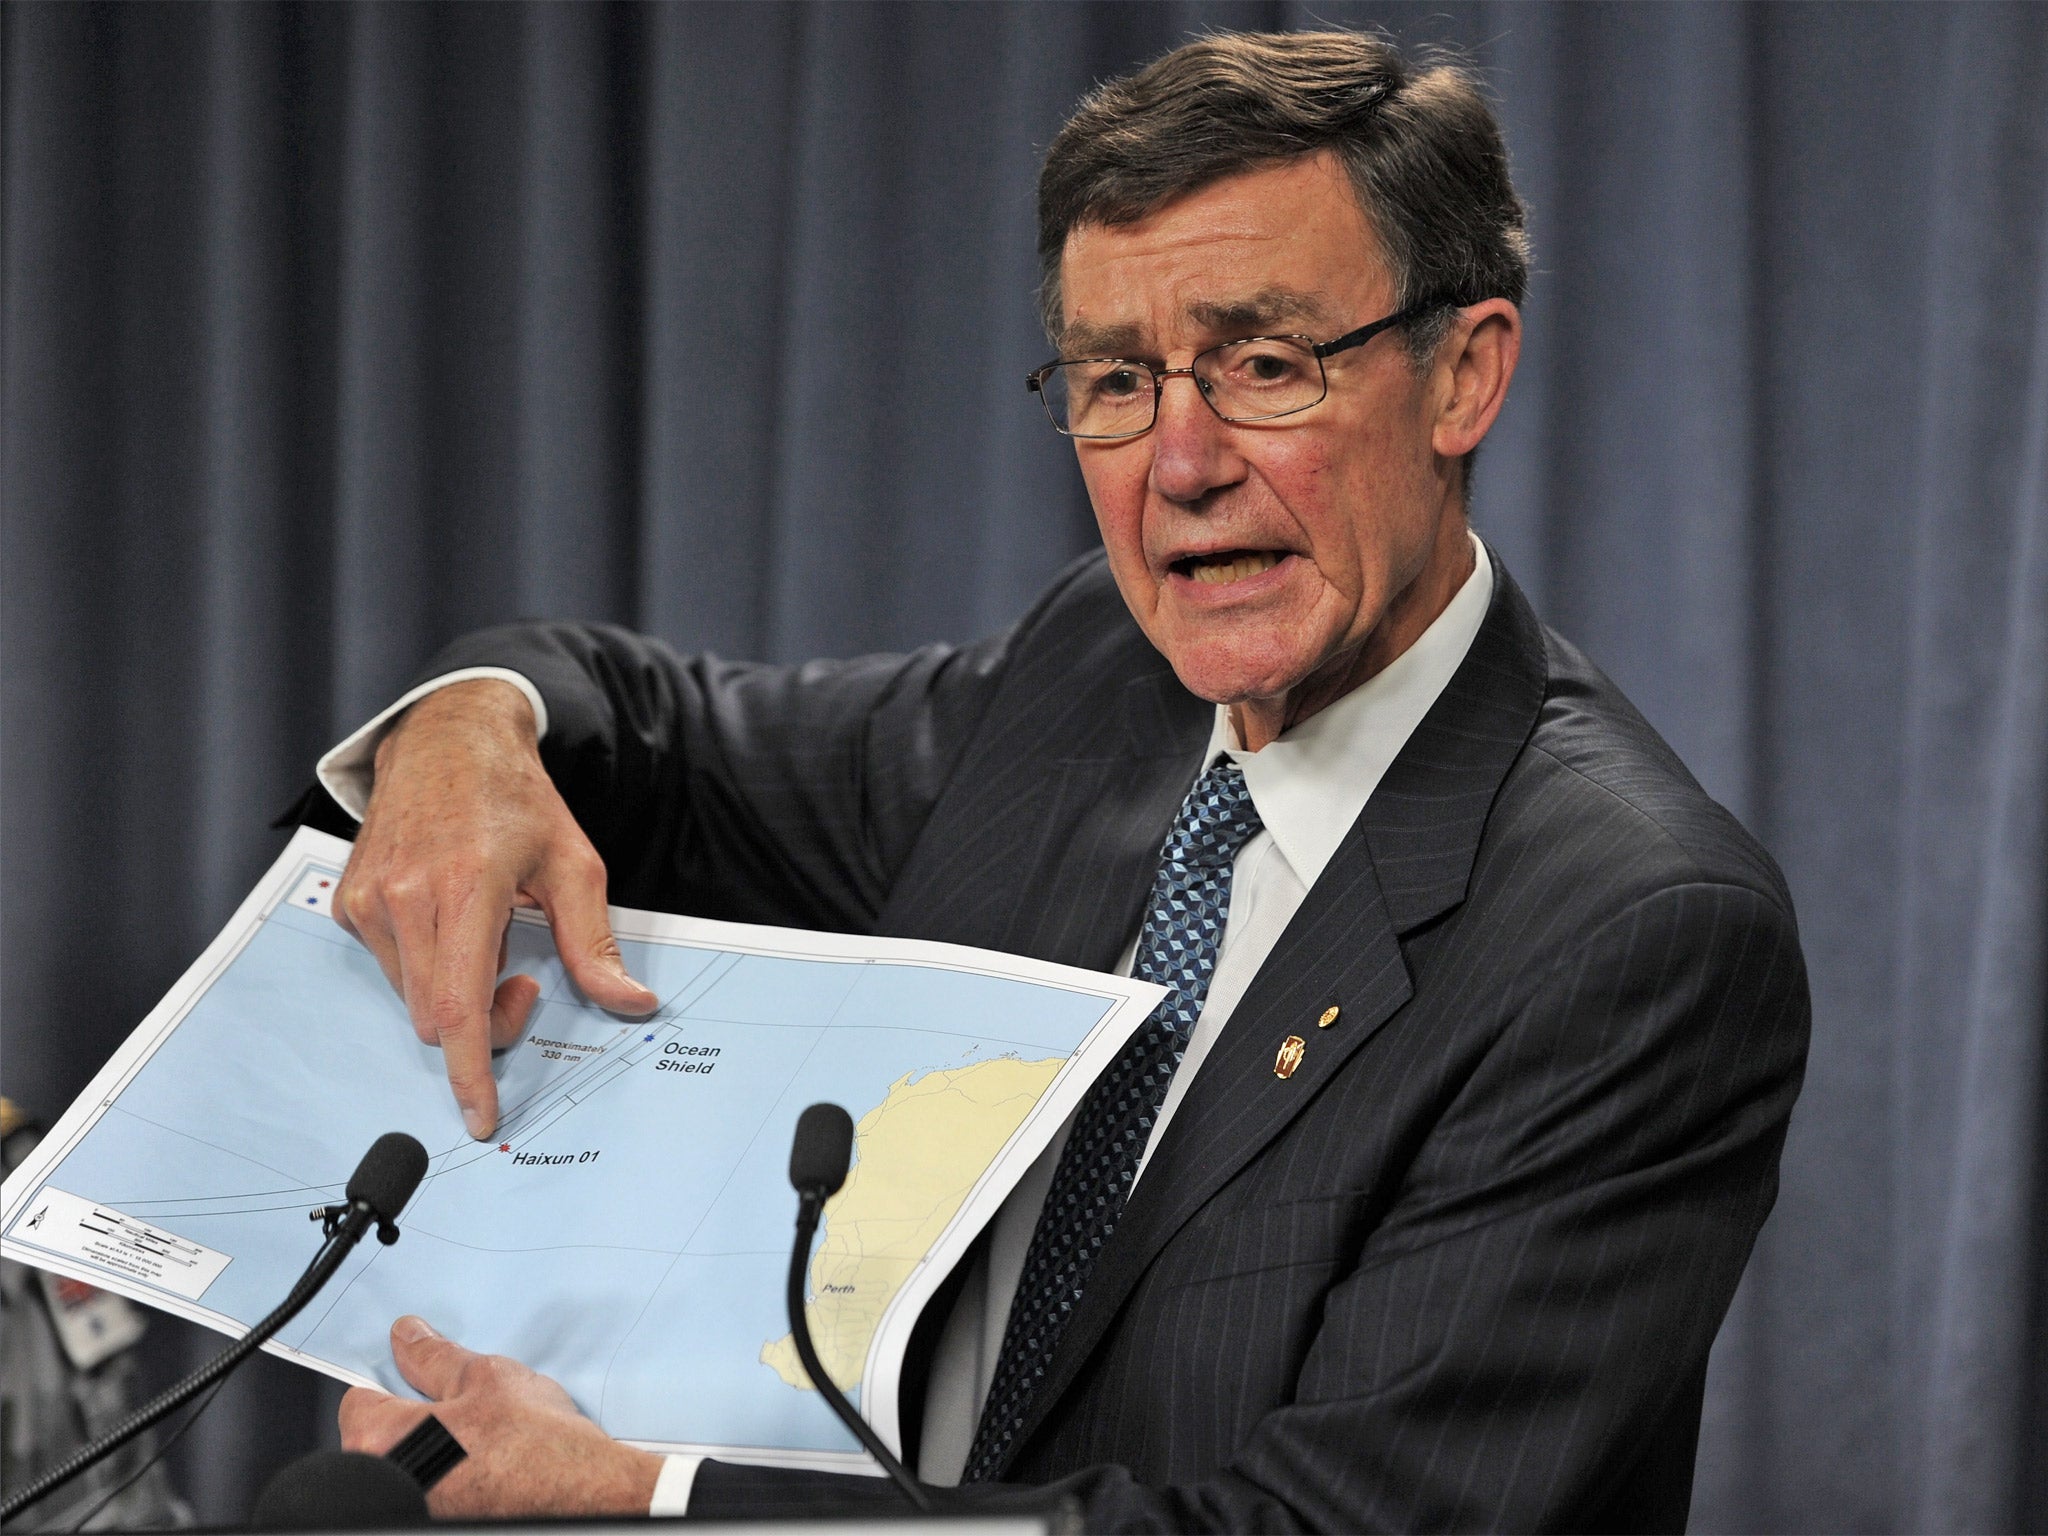 Angus Houston is leading the search for missing Malaysian aircraft